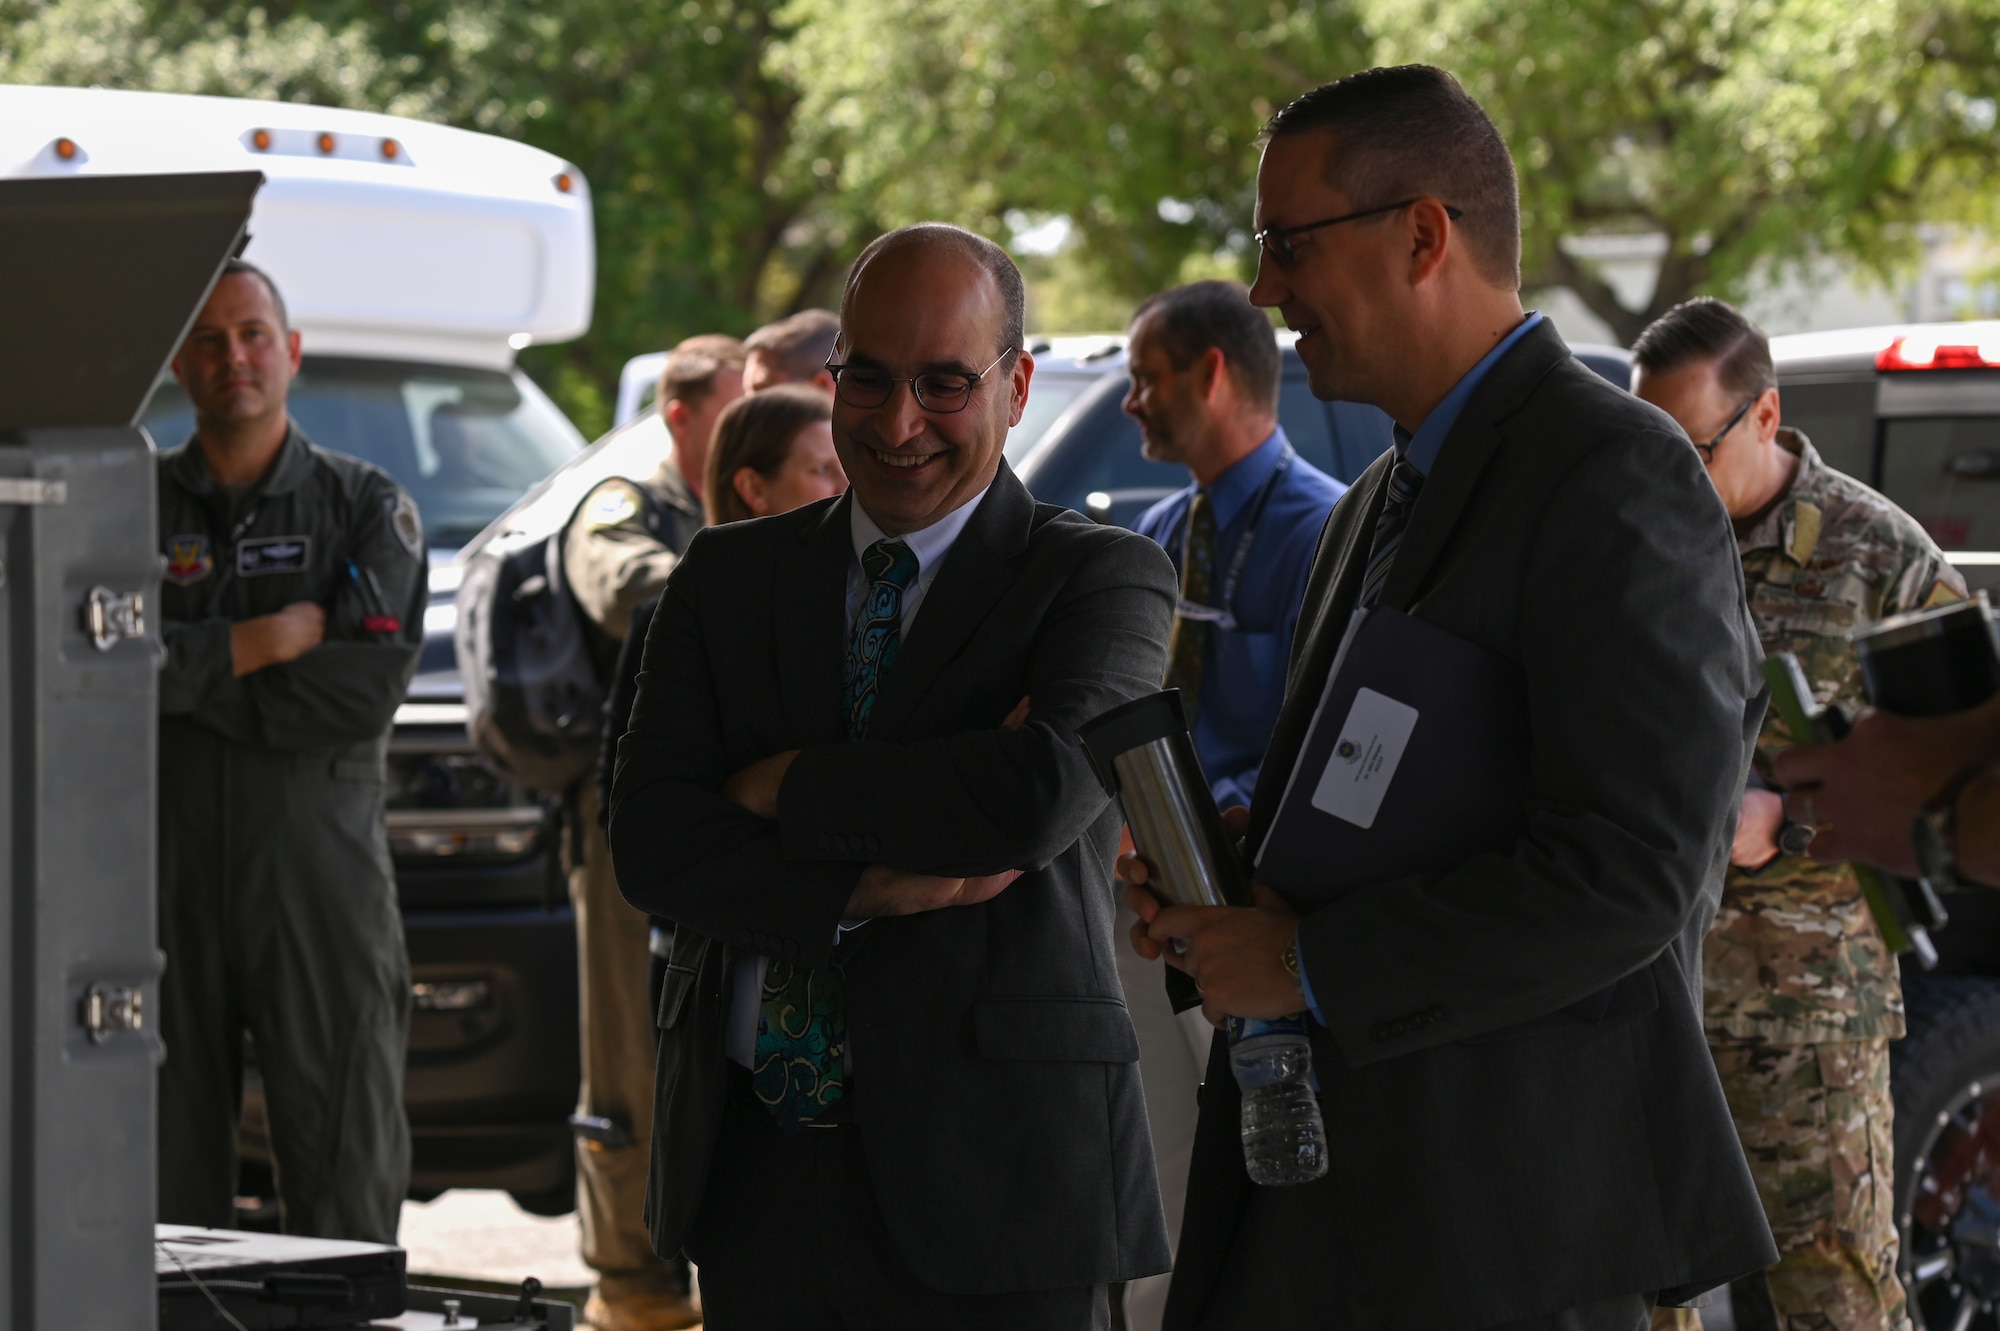 John F. Vona, Air Combat Command deputy director of the plans, program and requirements directorate, left, and Dr. John D. Matyjas, ACC chief scientist, right, visit the 350th Spectrum Warfare Wing at Eglin Air Force Base, Fla., April 11, 2023. The 350th SWW delivers adaptive and cutting-edge electromagnetic spectrum capabilities that provide the warfighter a tactical and strategic competitive advantage and freedom to attack, maneuver, and defend. (U.S. Air Force photo by Staff Sgt. Ericka A. Woolever)